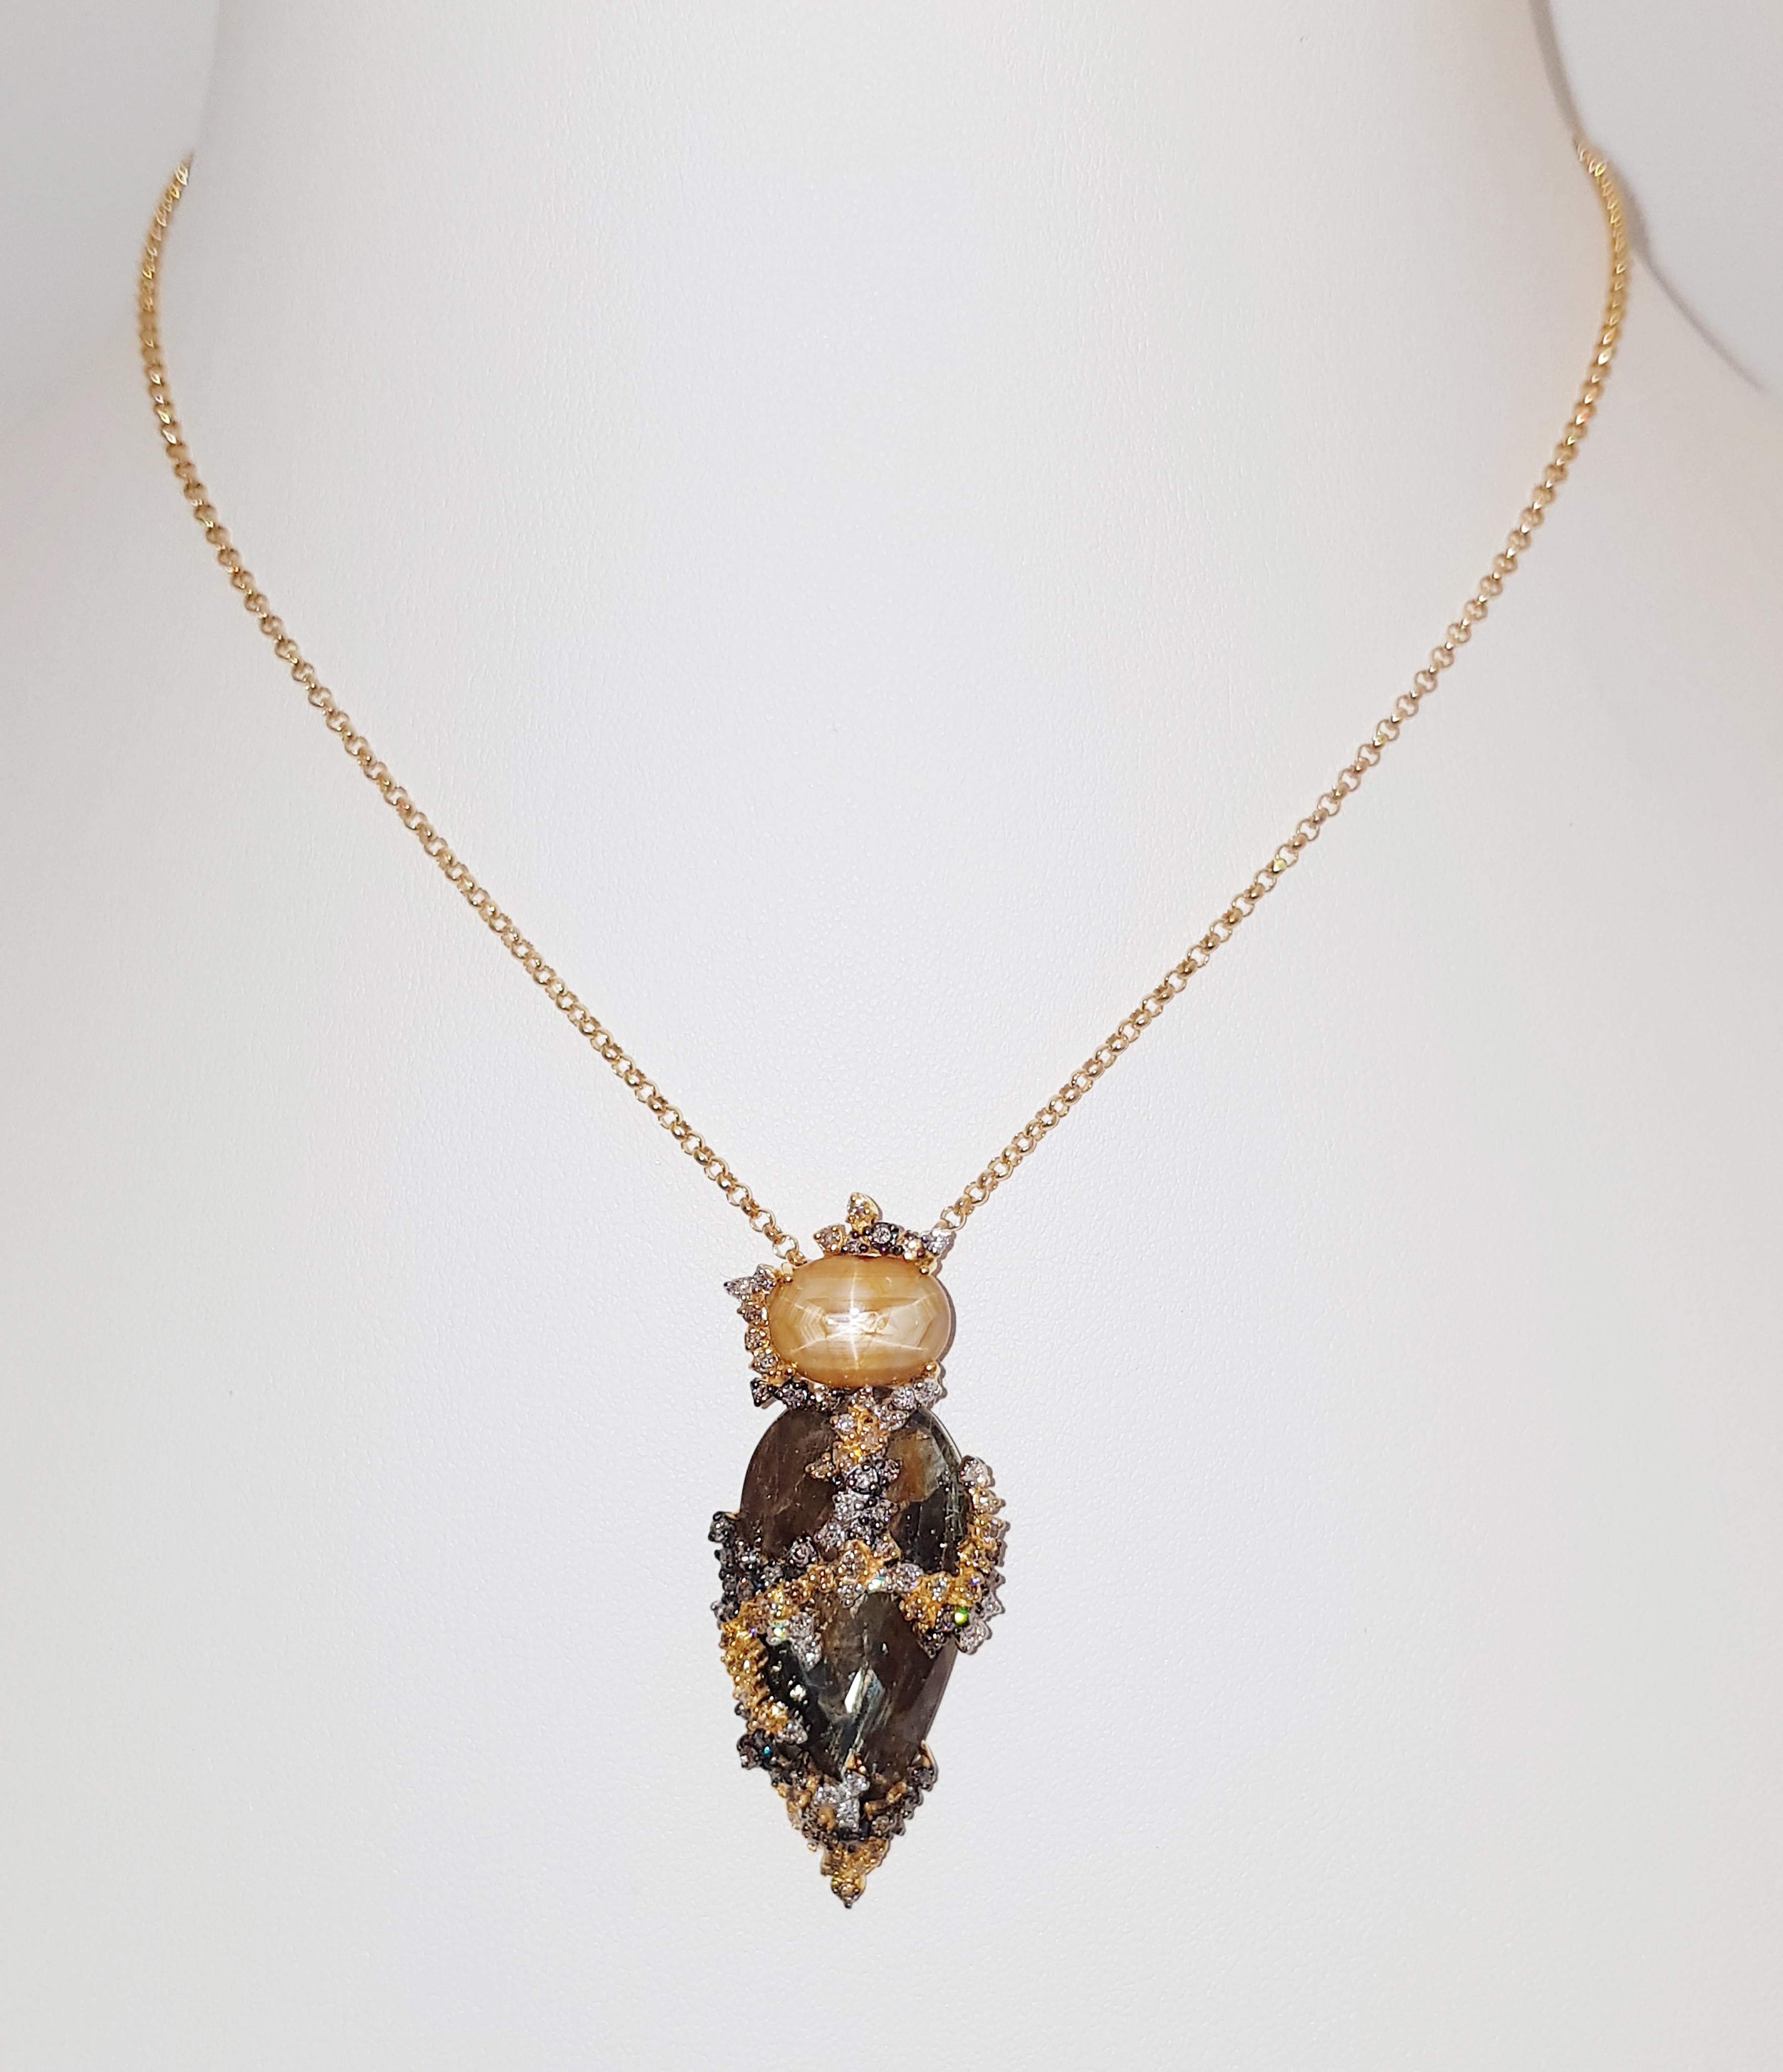 Rough Sapphire 27.89 carats, Yellow Star Sapphire 6.97 carat, Brown Diamond 0.73 carat and Diamond 0.29 carat Pendant set in 18 Karat Gold Settings
(chain not included)

Width: 2.1 cm 
Length: 5.0 cm
Total Weight:  grams

